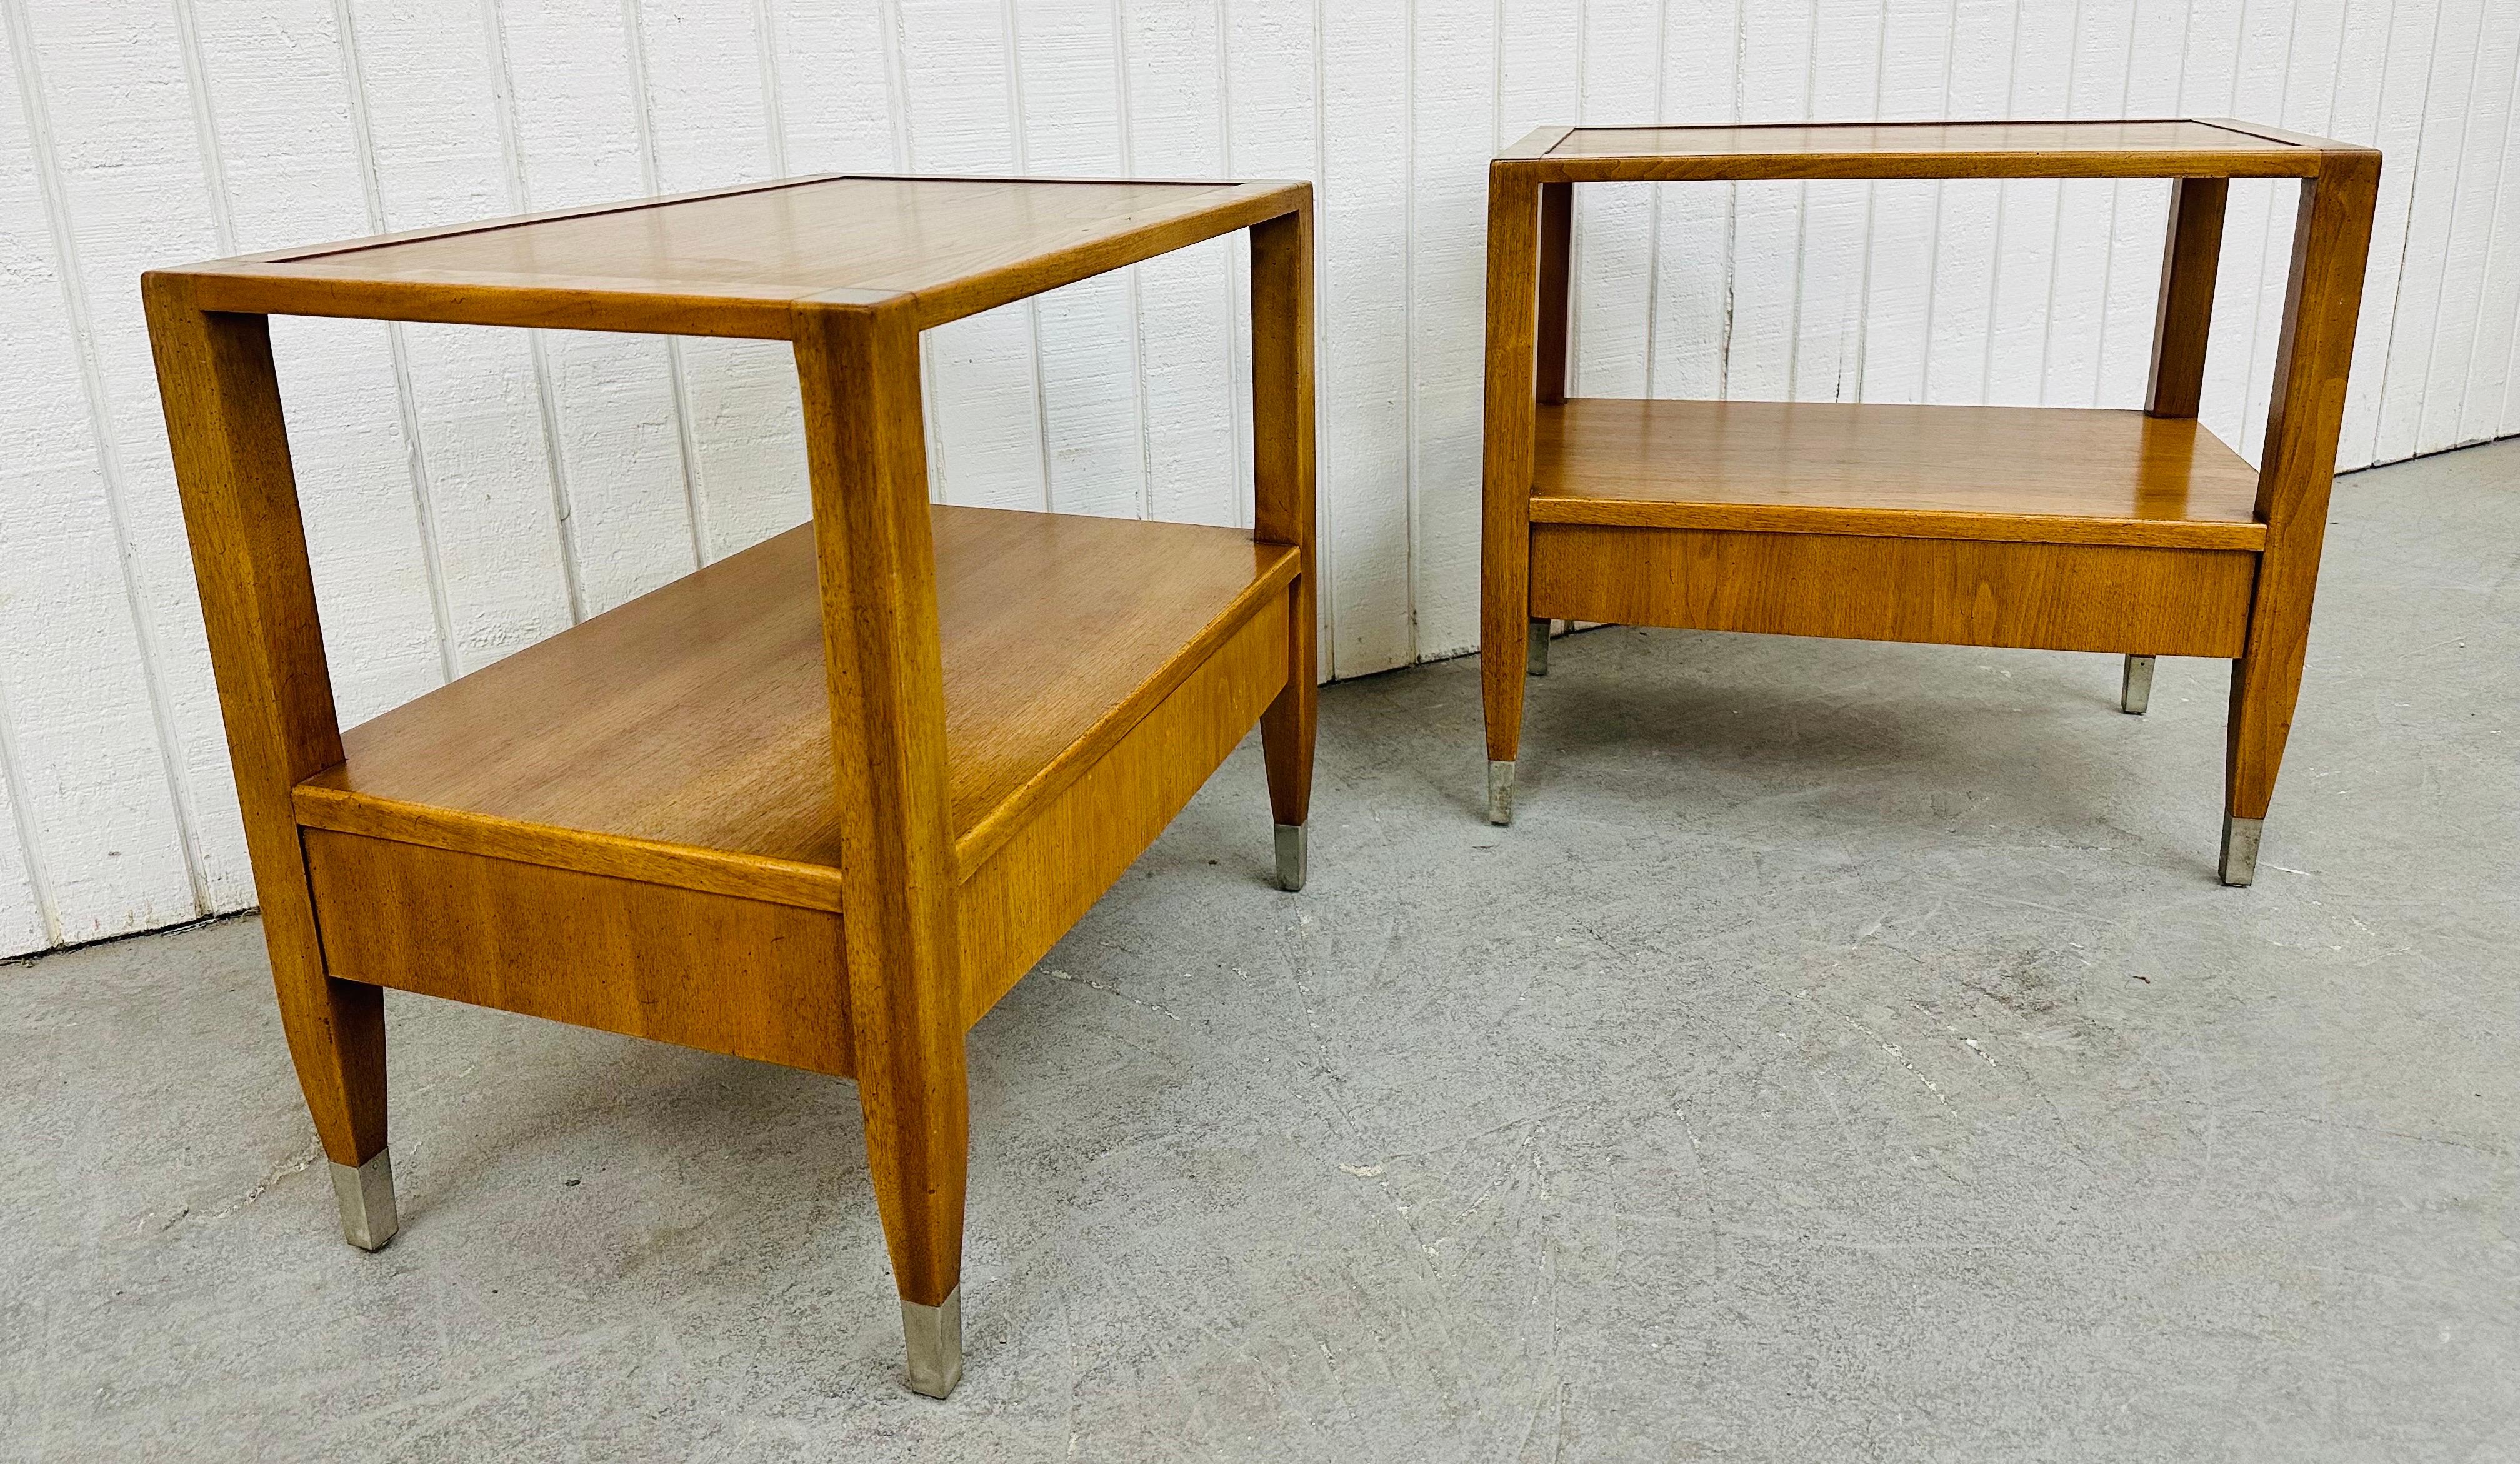 This listing is for a pair of Mid-Century Modern Sligh Walnut Nightstands. Featuring a straight line design, two tiers for storage, a single drawer, chrome caps on the feet, a finished backside, and a beautiful walnut finish. This is an exceptional